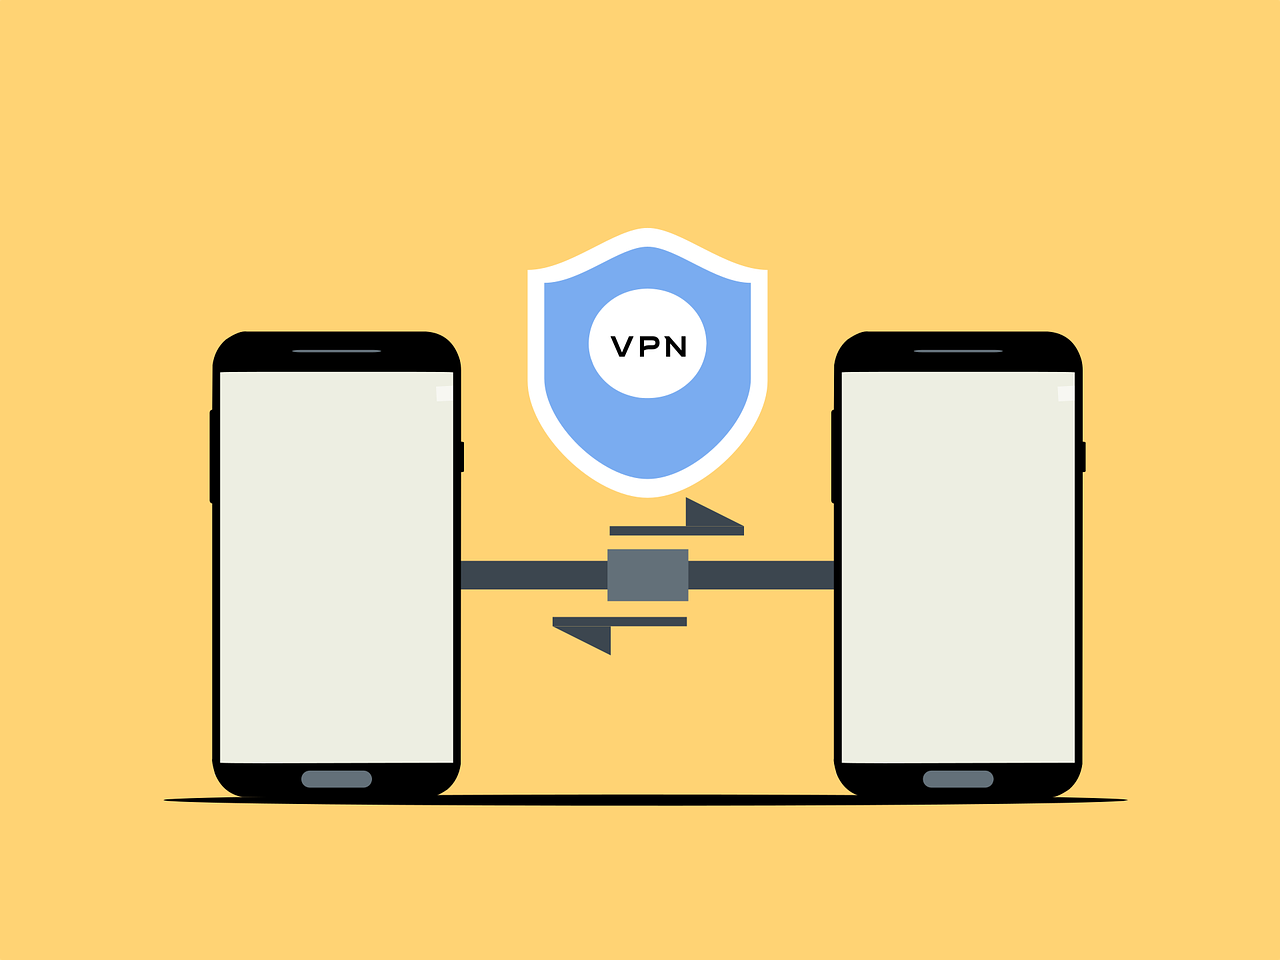 What Are The Basic Features Of A VPN?